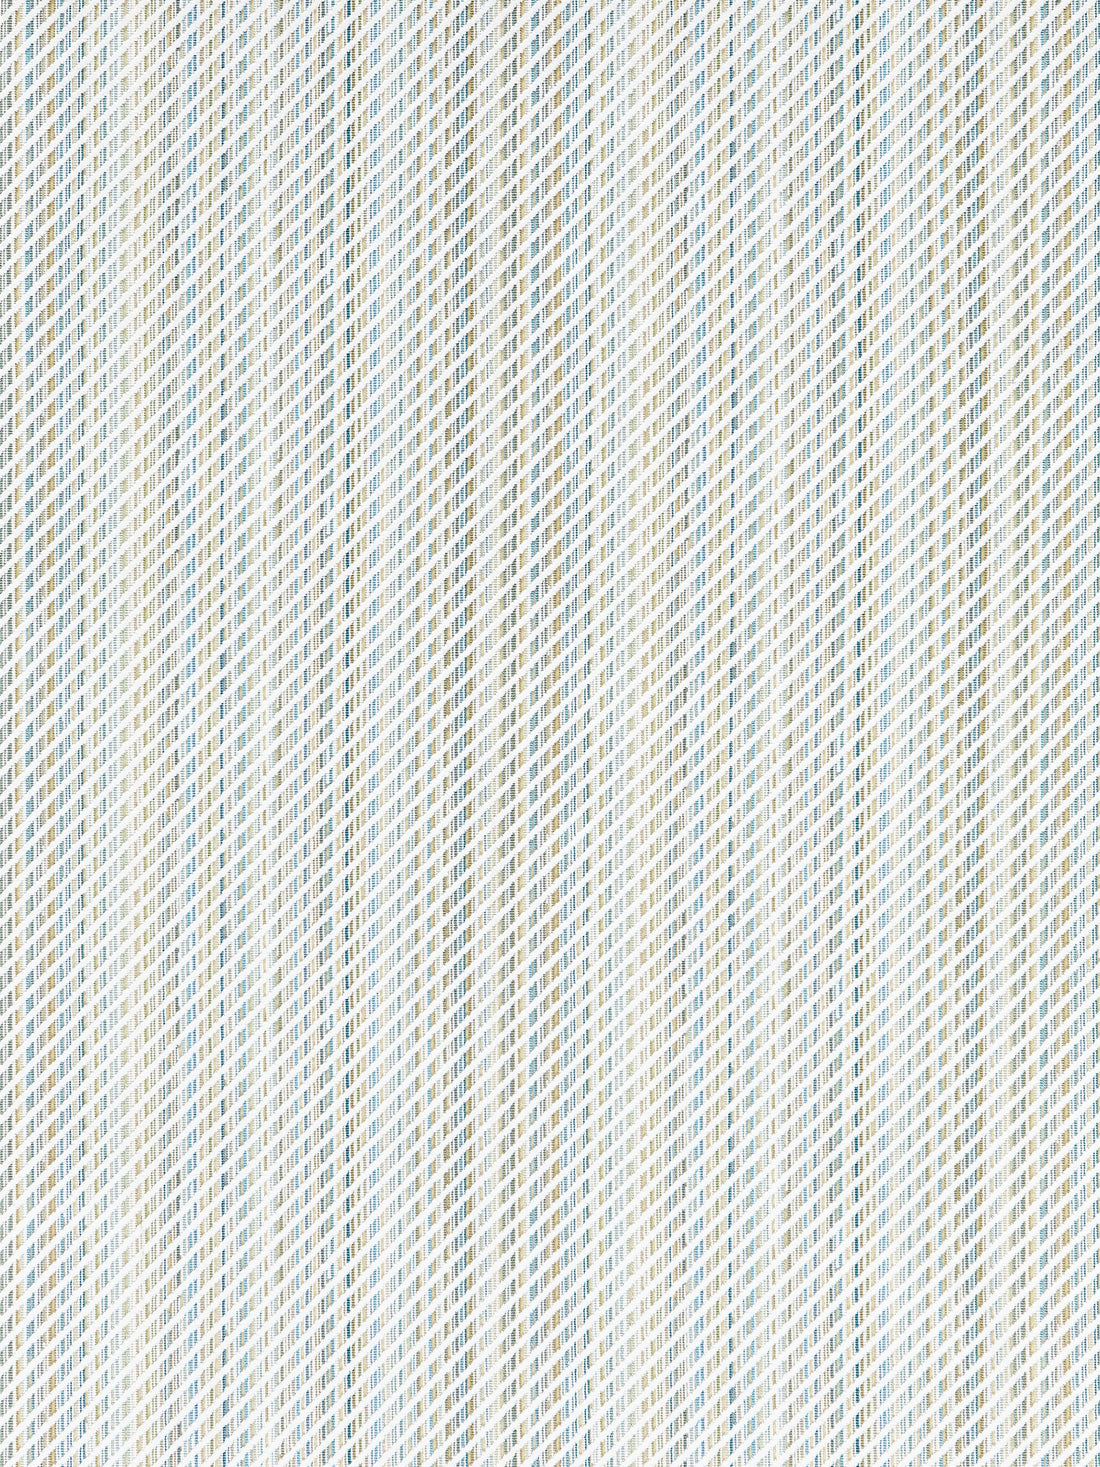 Prisma Velvet fabric in high tide color - pattern number SC 000127238 - by Scalamandre in the Scalamandre Fabrics Book 1 collection